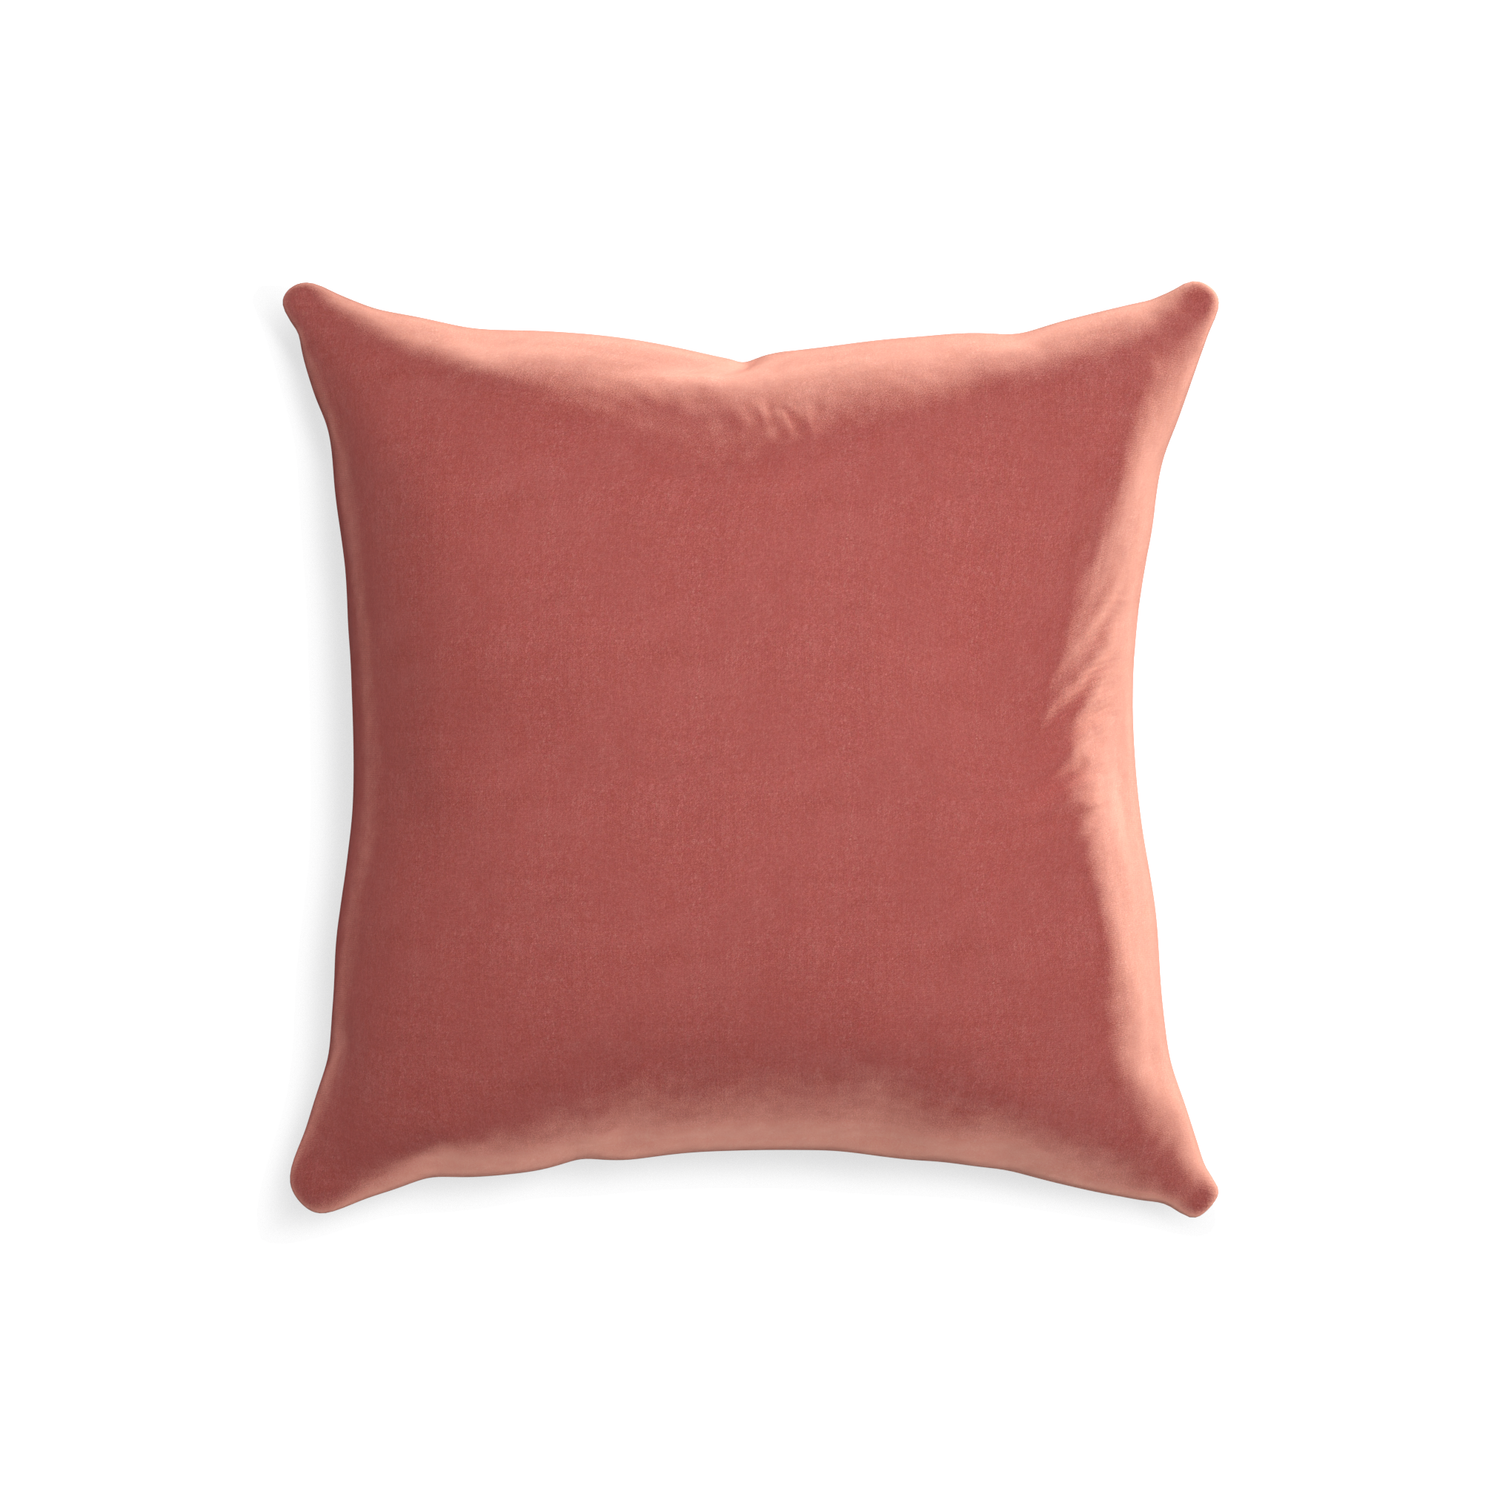 20-square cosmo velvet custom pillow with none on white background